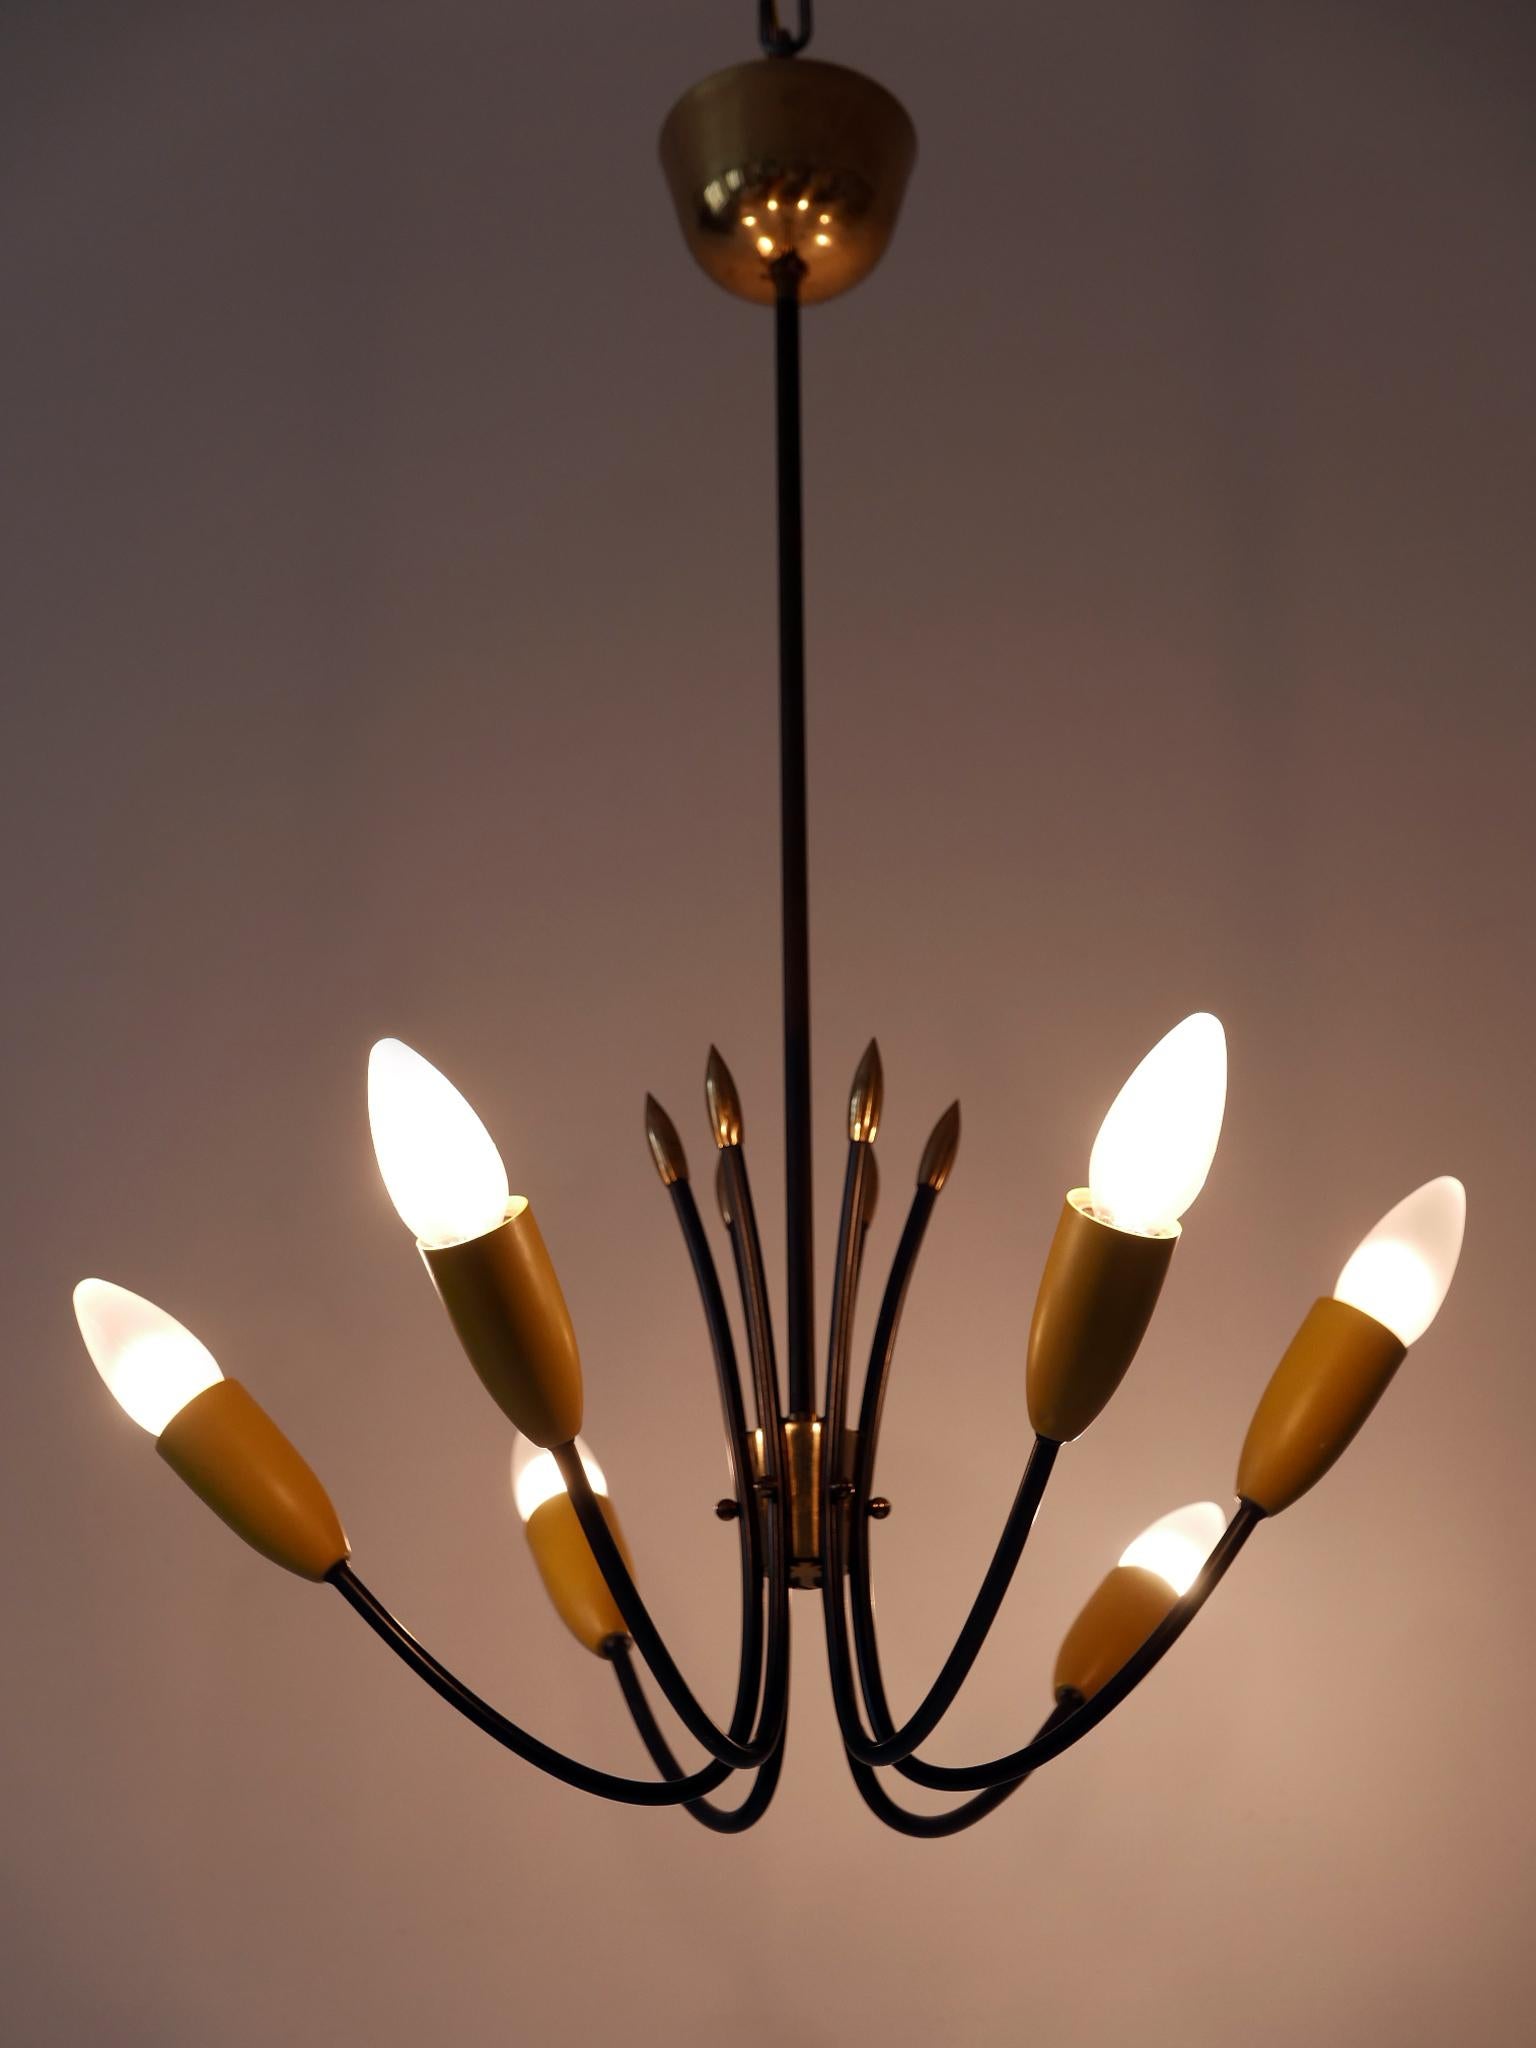 Lovely and highly decorative Mid-Century Modern six-flamed Sputnik pendant lamp or chandelier. Designed & manufactured in Germany, 1950s.

Executed in brass & metal, the pendant lamp / chandelier is executed with six x E14 / E12 Edison screw fit